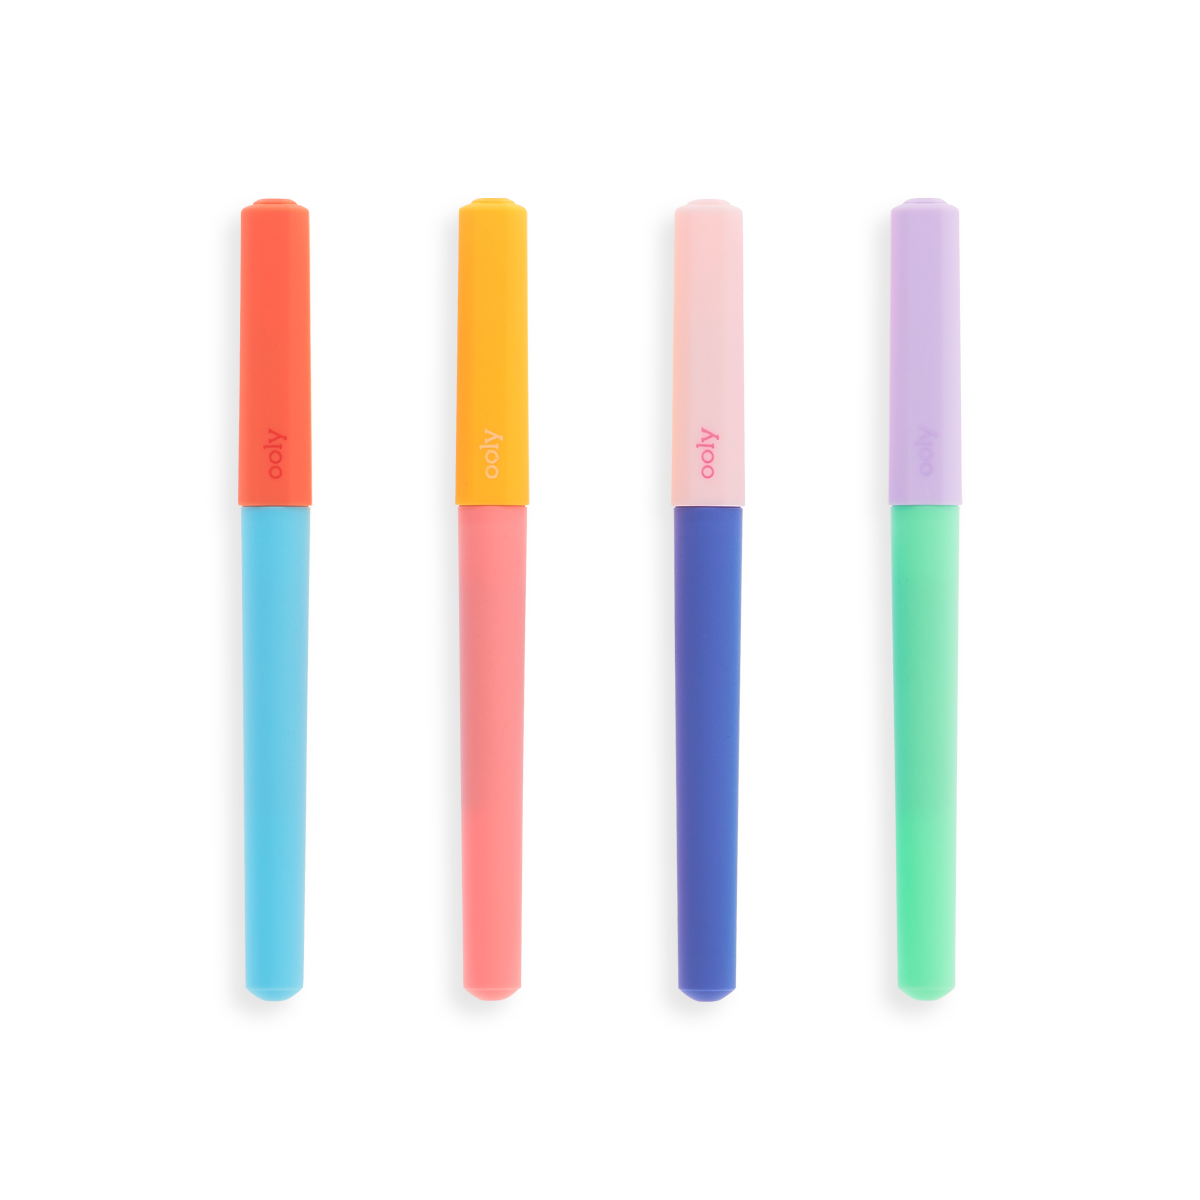 Ooly Fab Fountain Pen - Set of 4